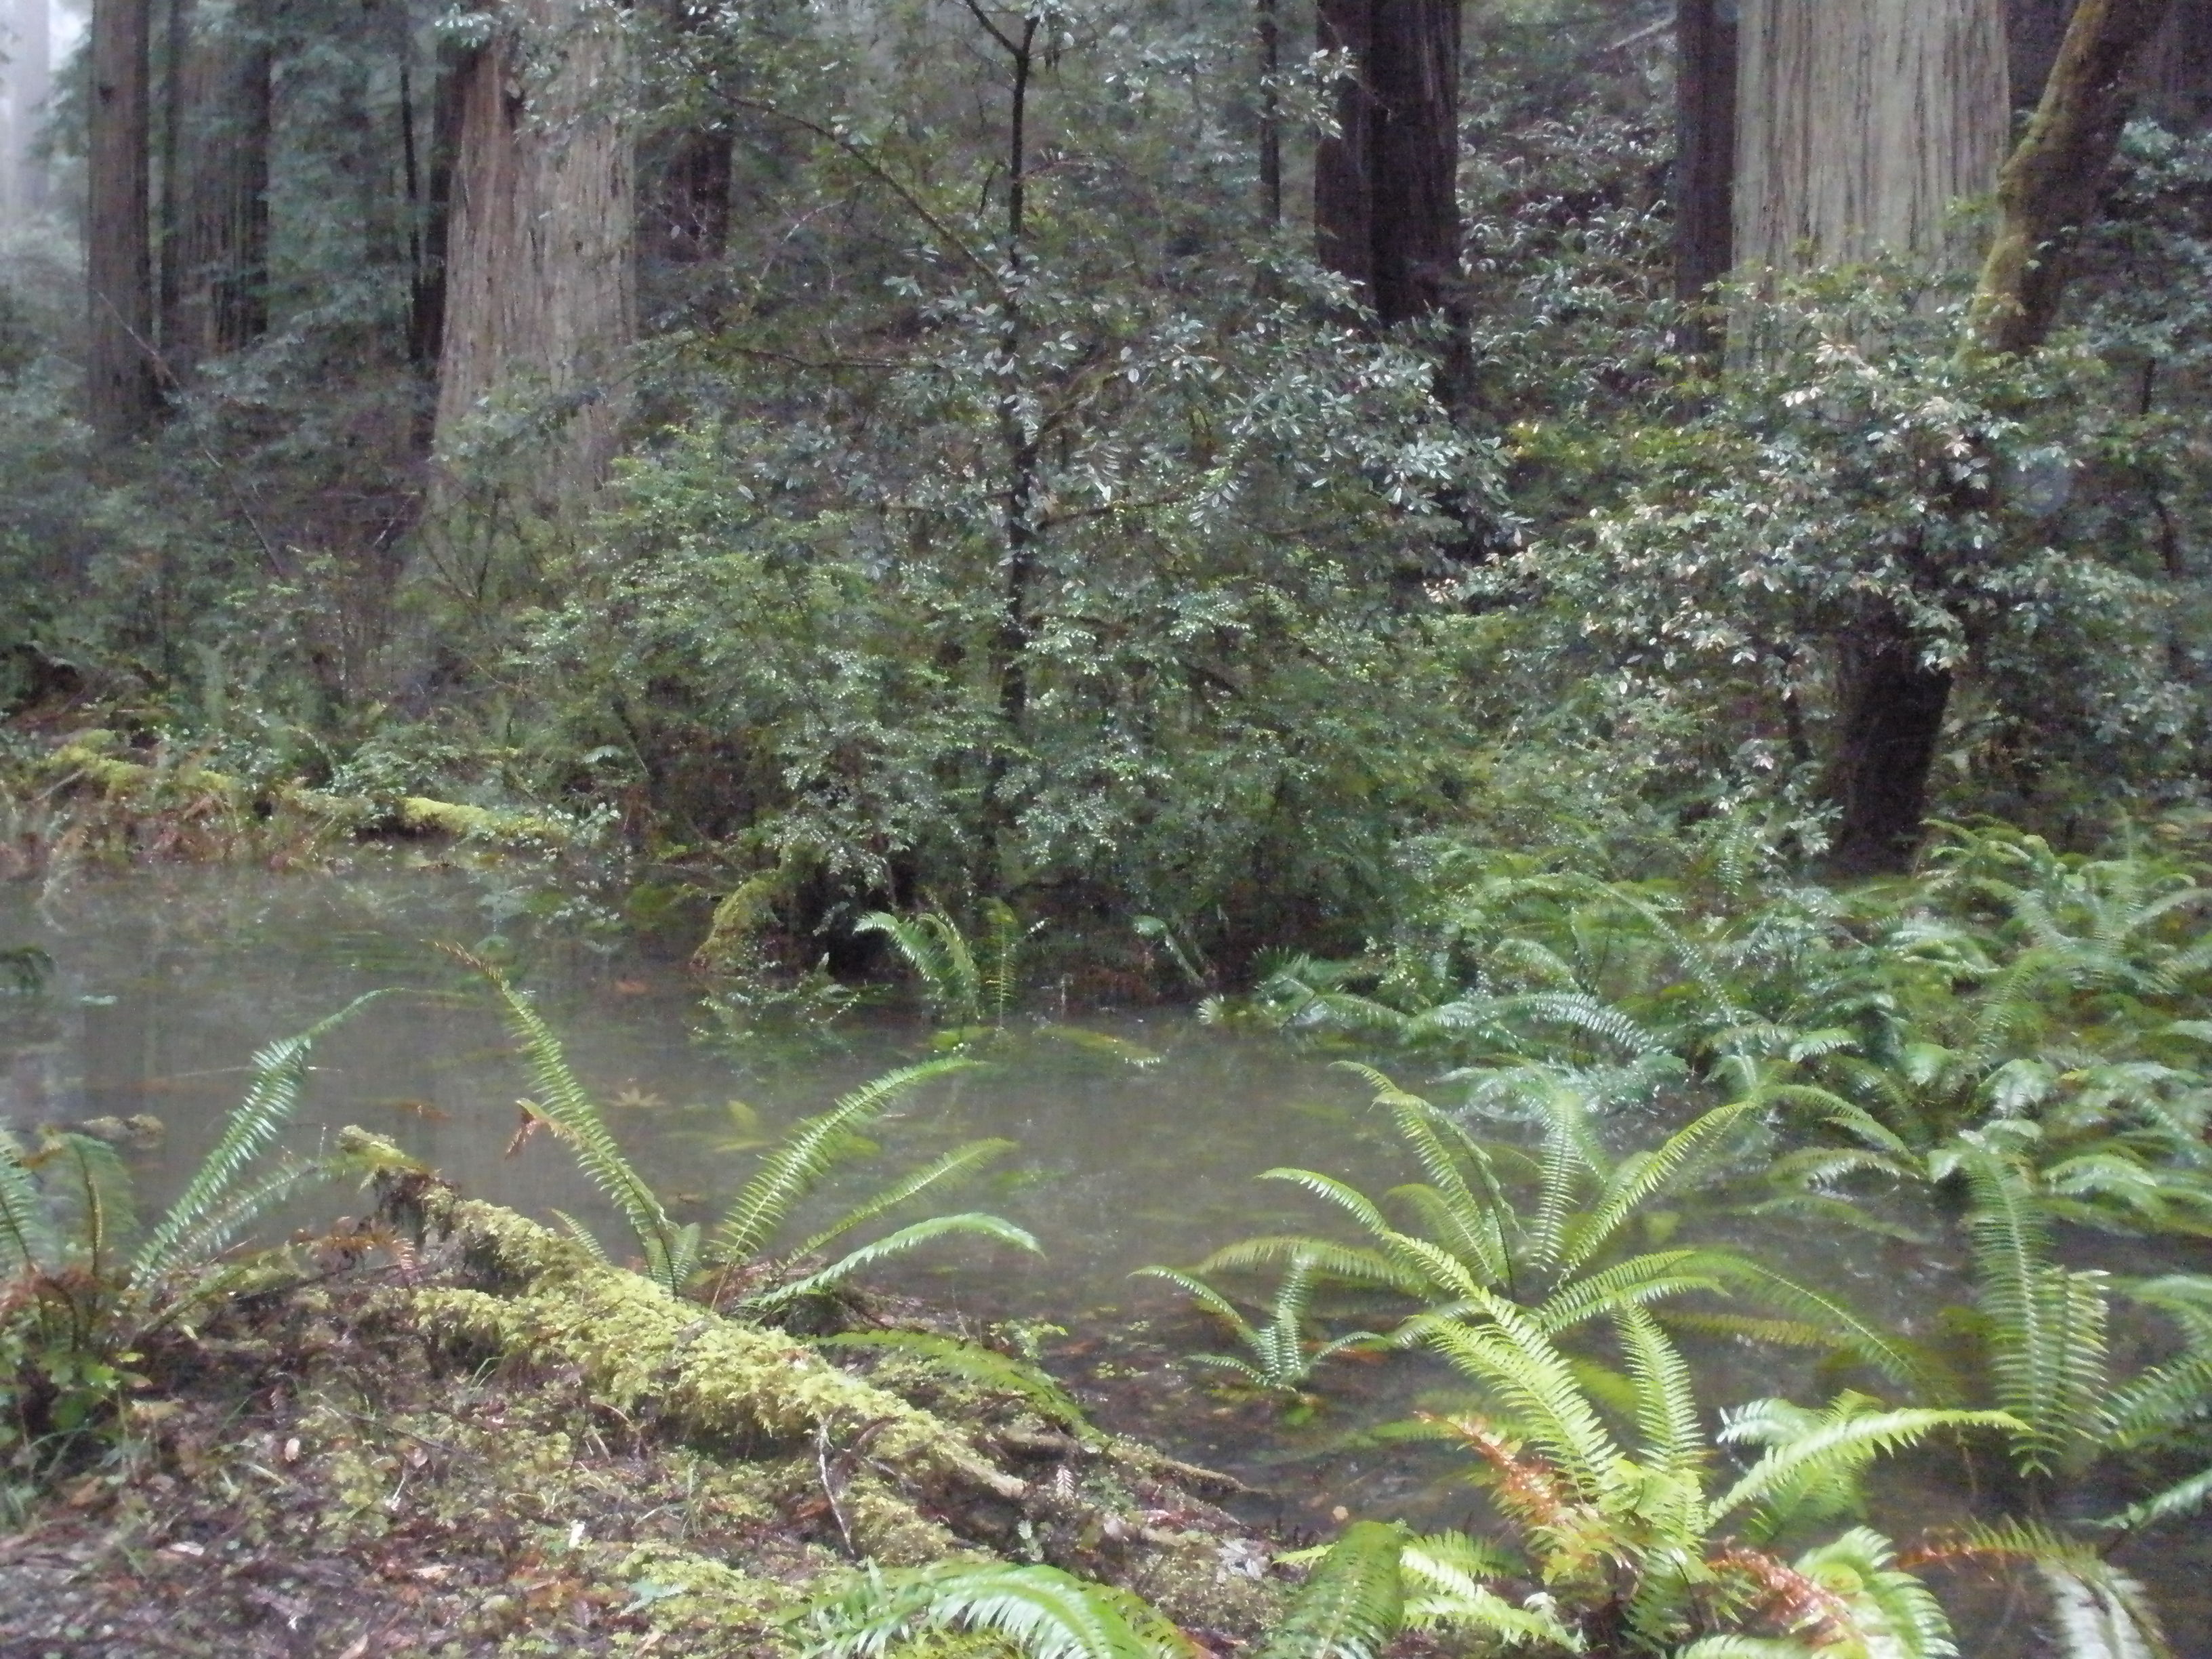 Personal photo: Frequent flooding that the coast redwoods are able to overcome.